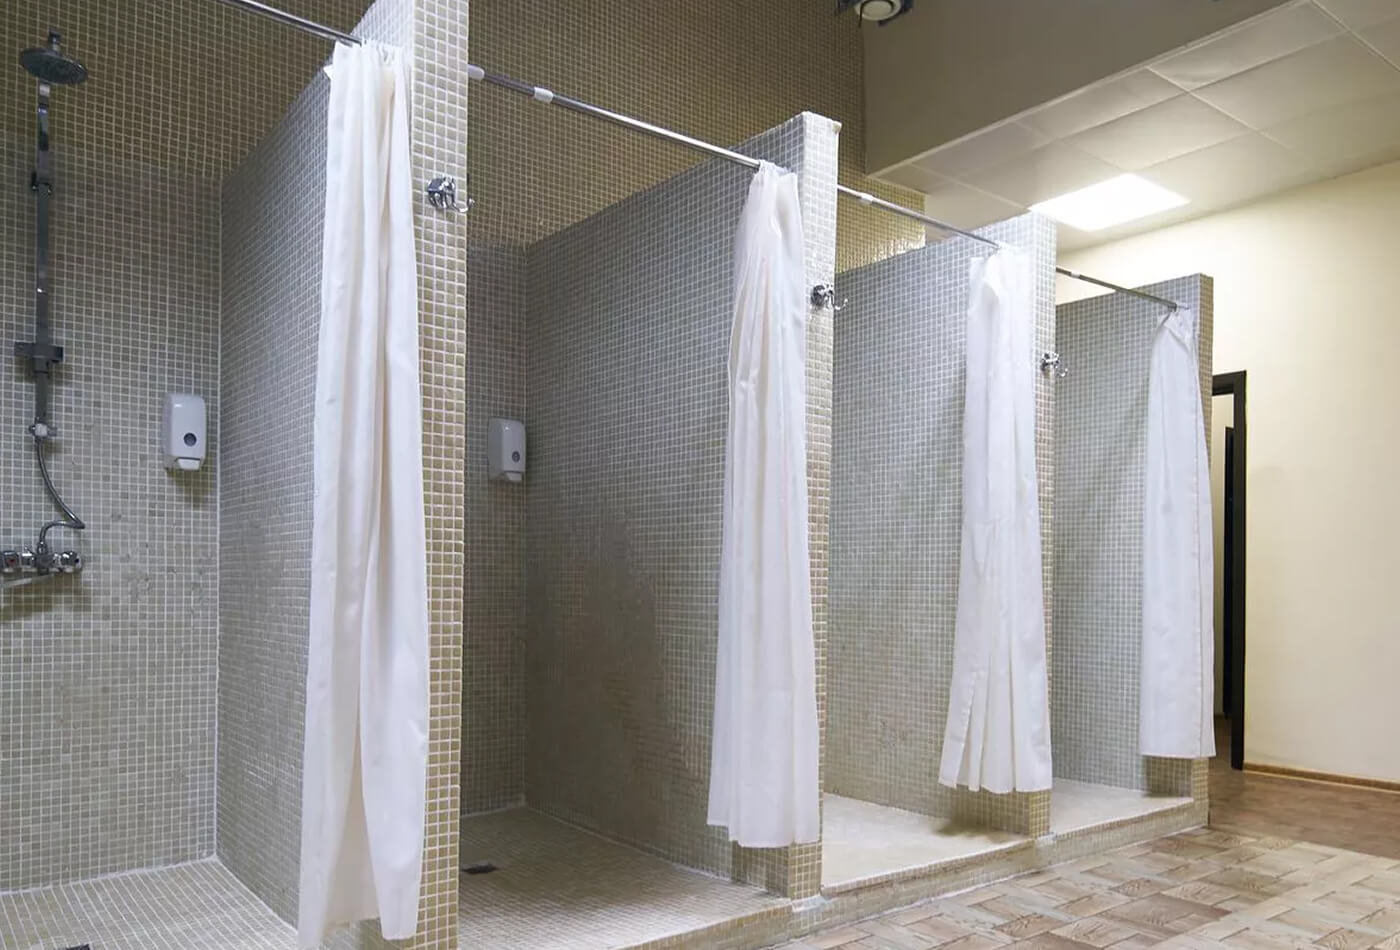 Communal Bathrooms Styling Ideas for your Gym